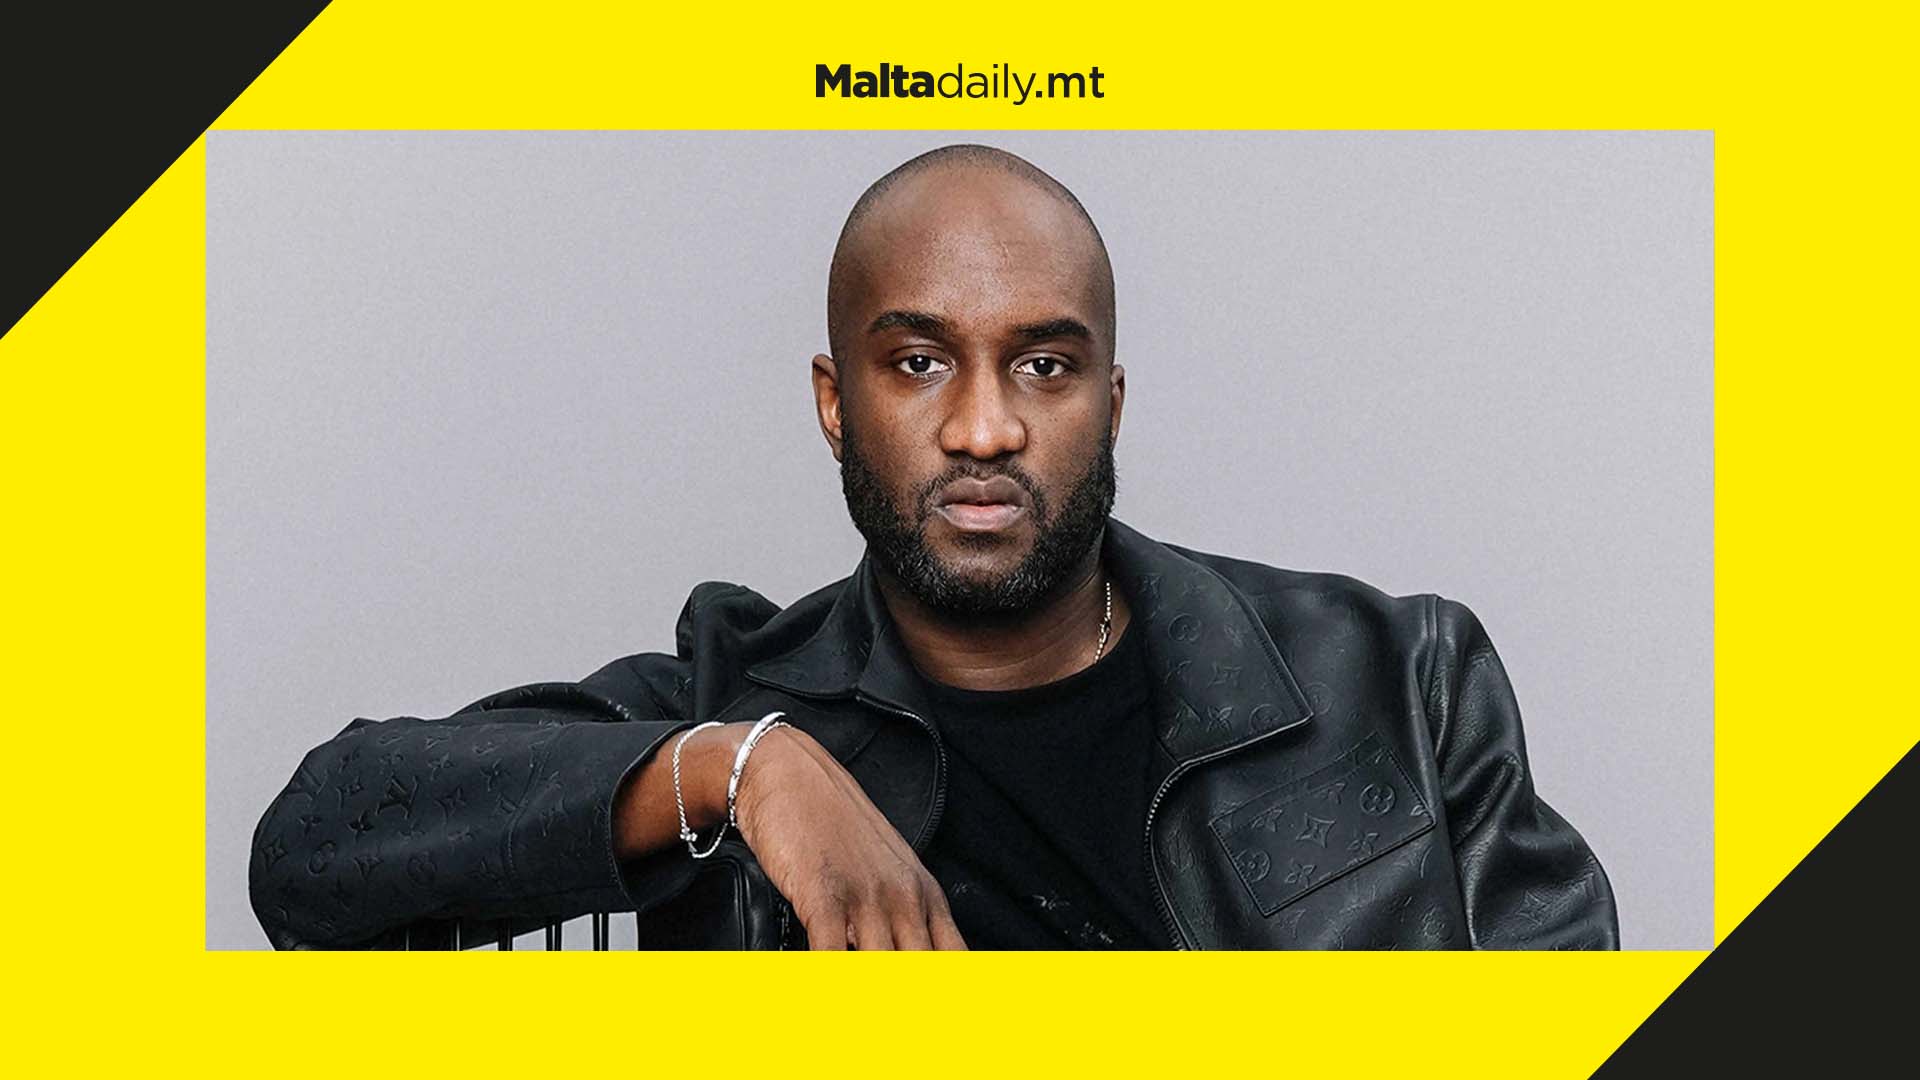 Louis Vuitton & Off-White boss Virgil Abloh dies of cancer at age 41